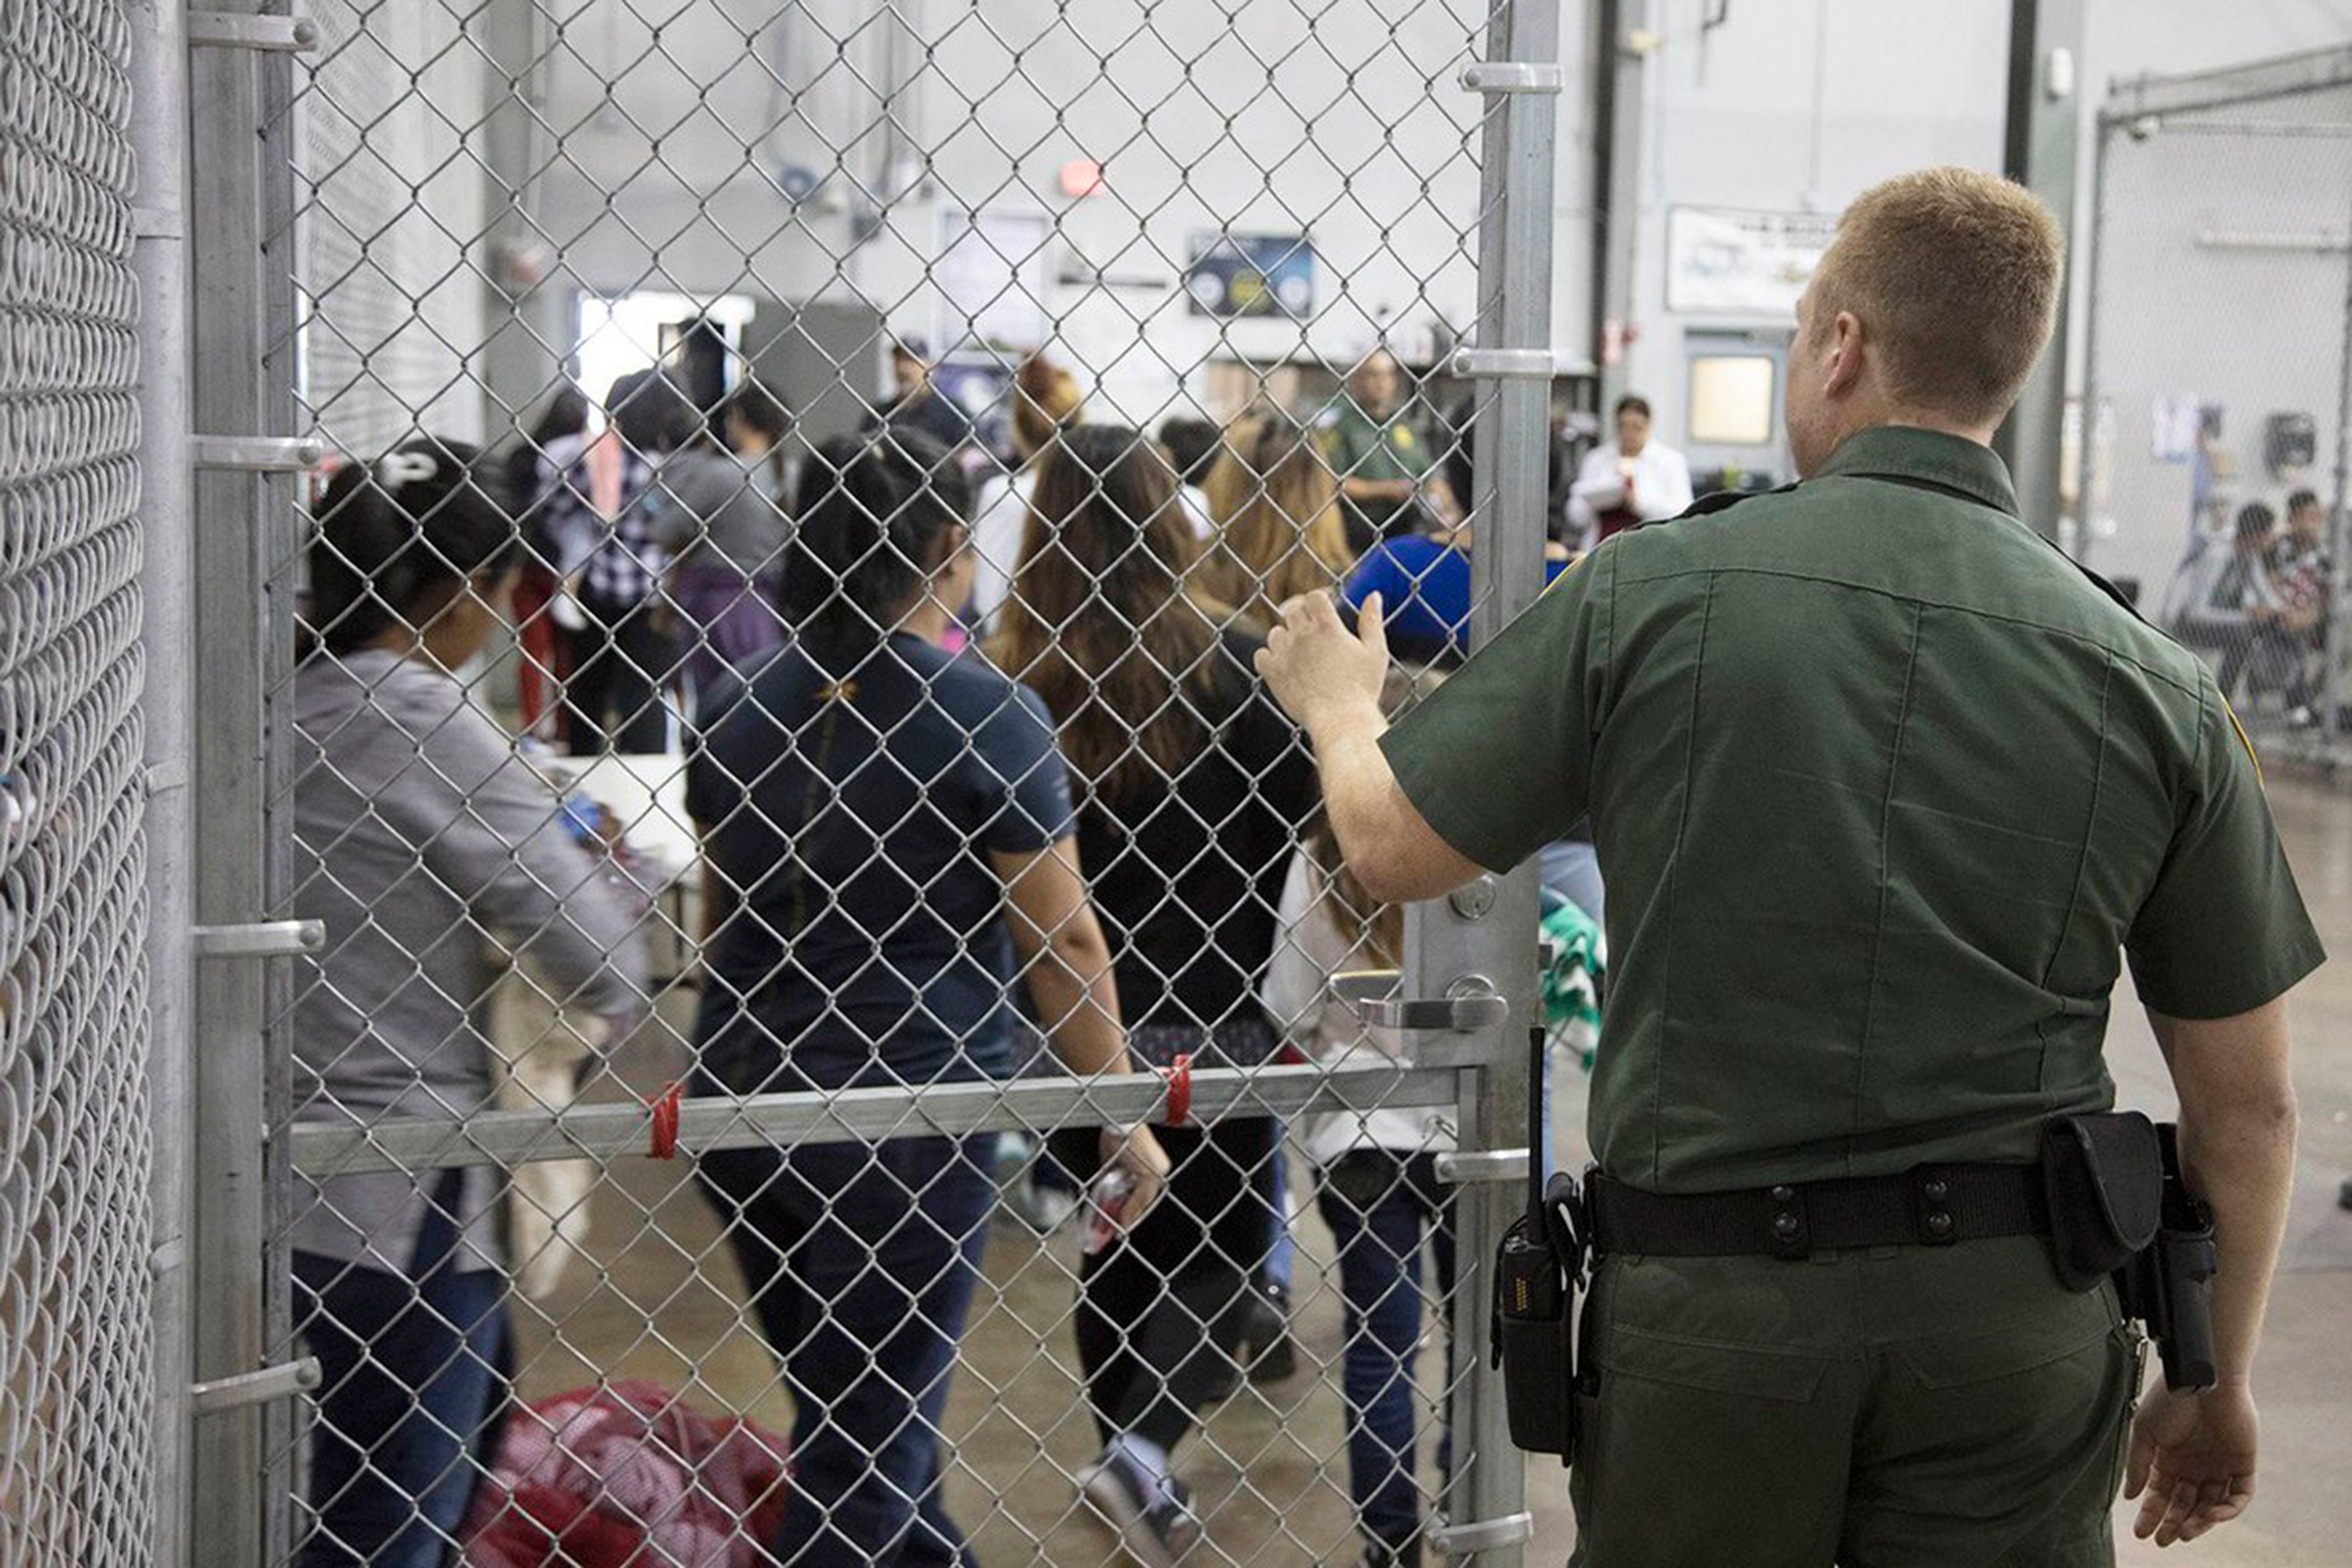 An undated handout photo made available on 18 June 2018 by the US Customs and Border Patrol showing people inside a United States Border Patrol Processing Center, in McAllen, Texas (US CUSTOMS AND BORDER PATROL/HANDOUT/EPA-EFE/REX/Shutterstock)